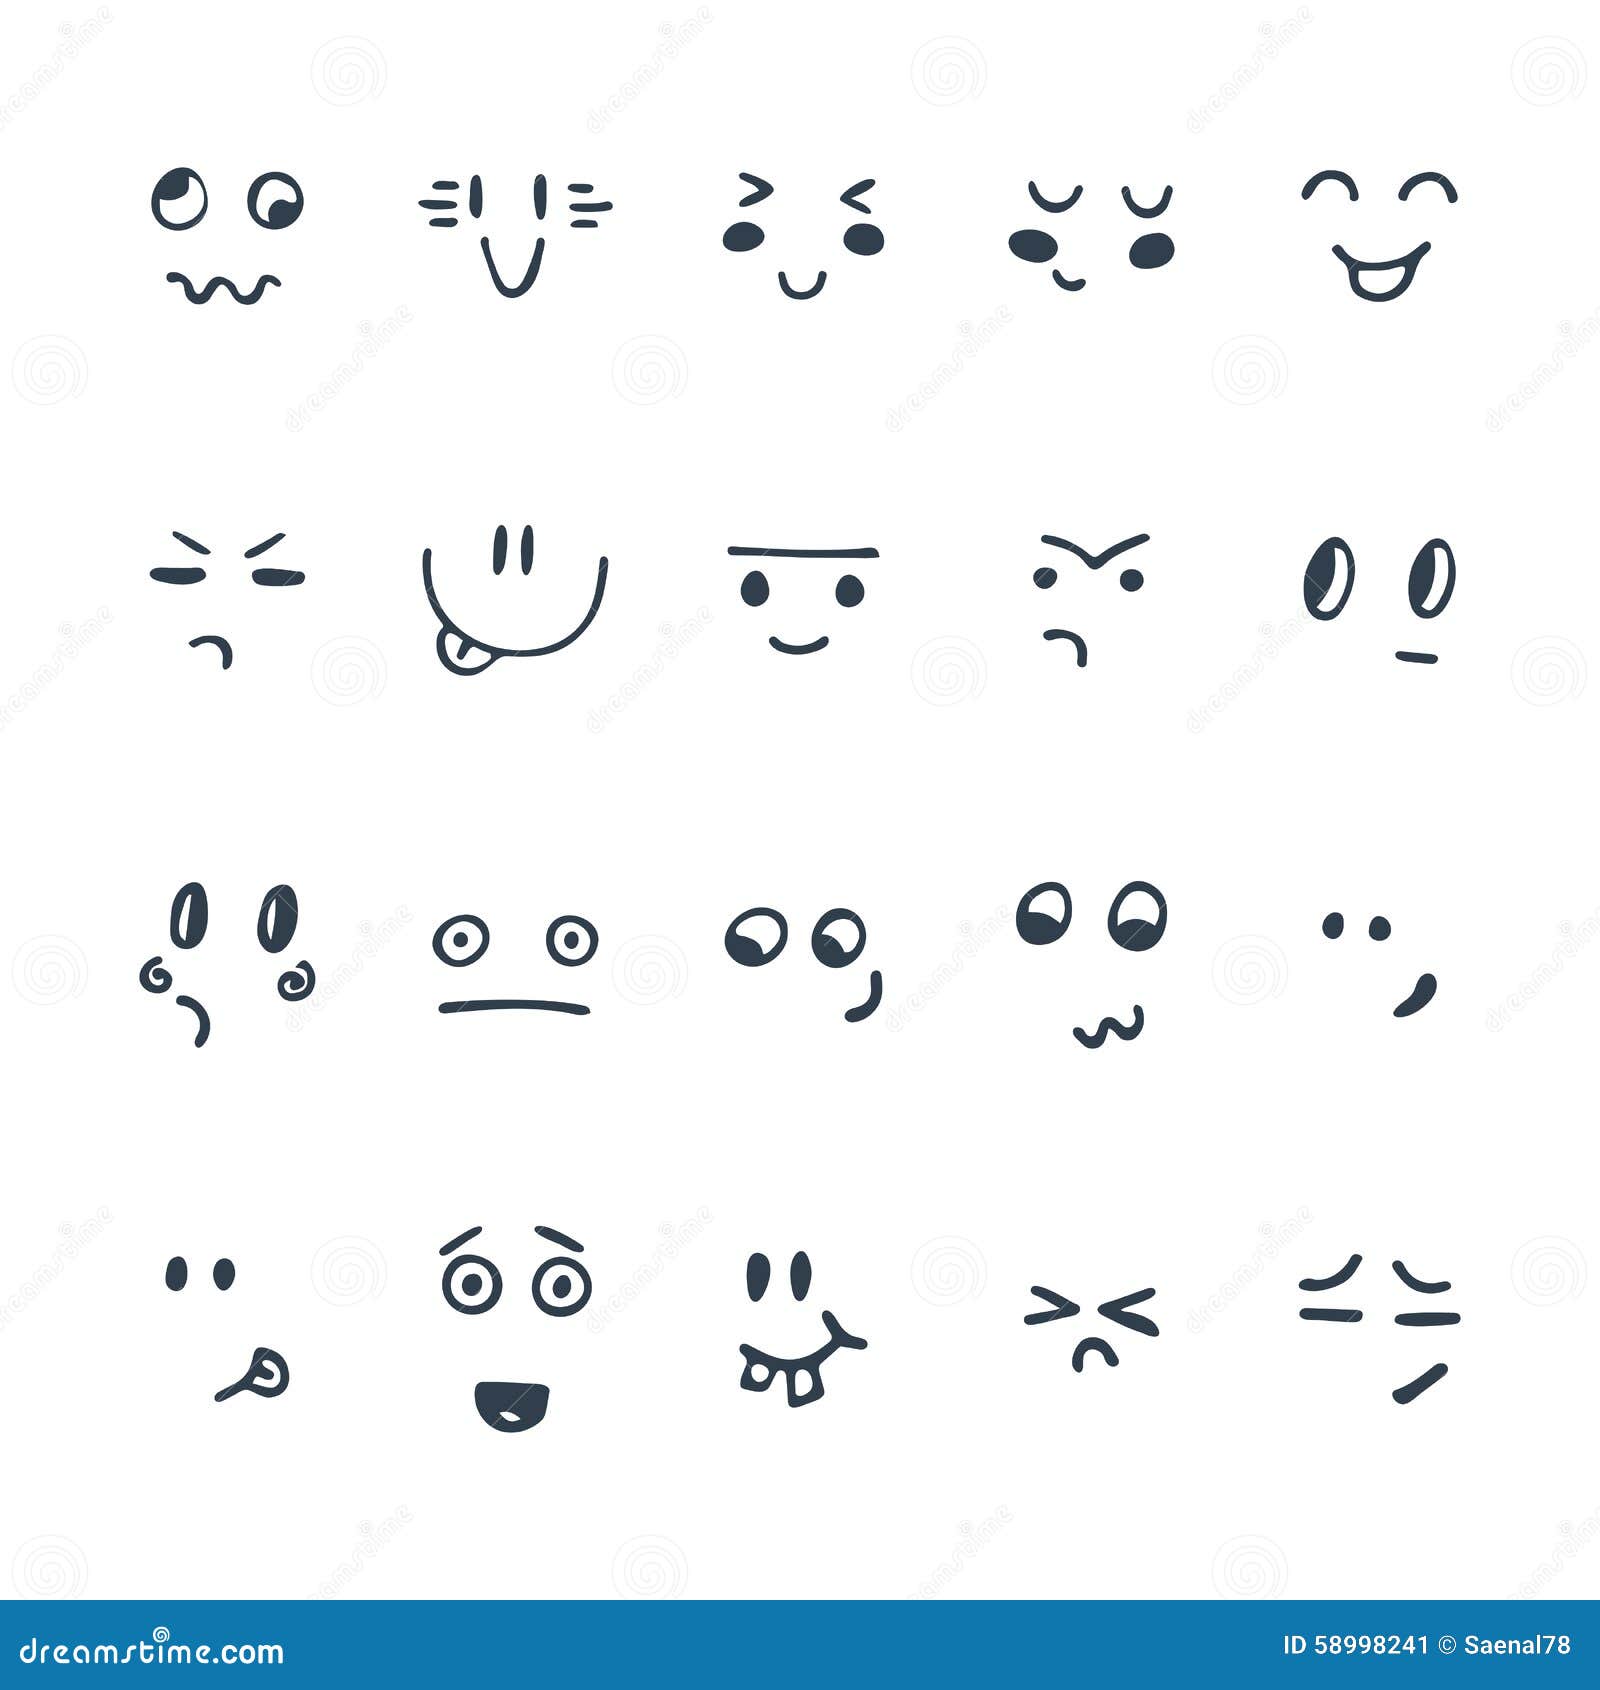 Cartoon Faces With Different Expressions